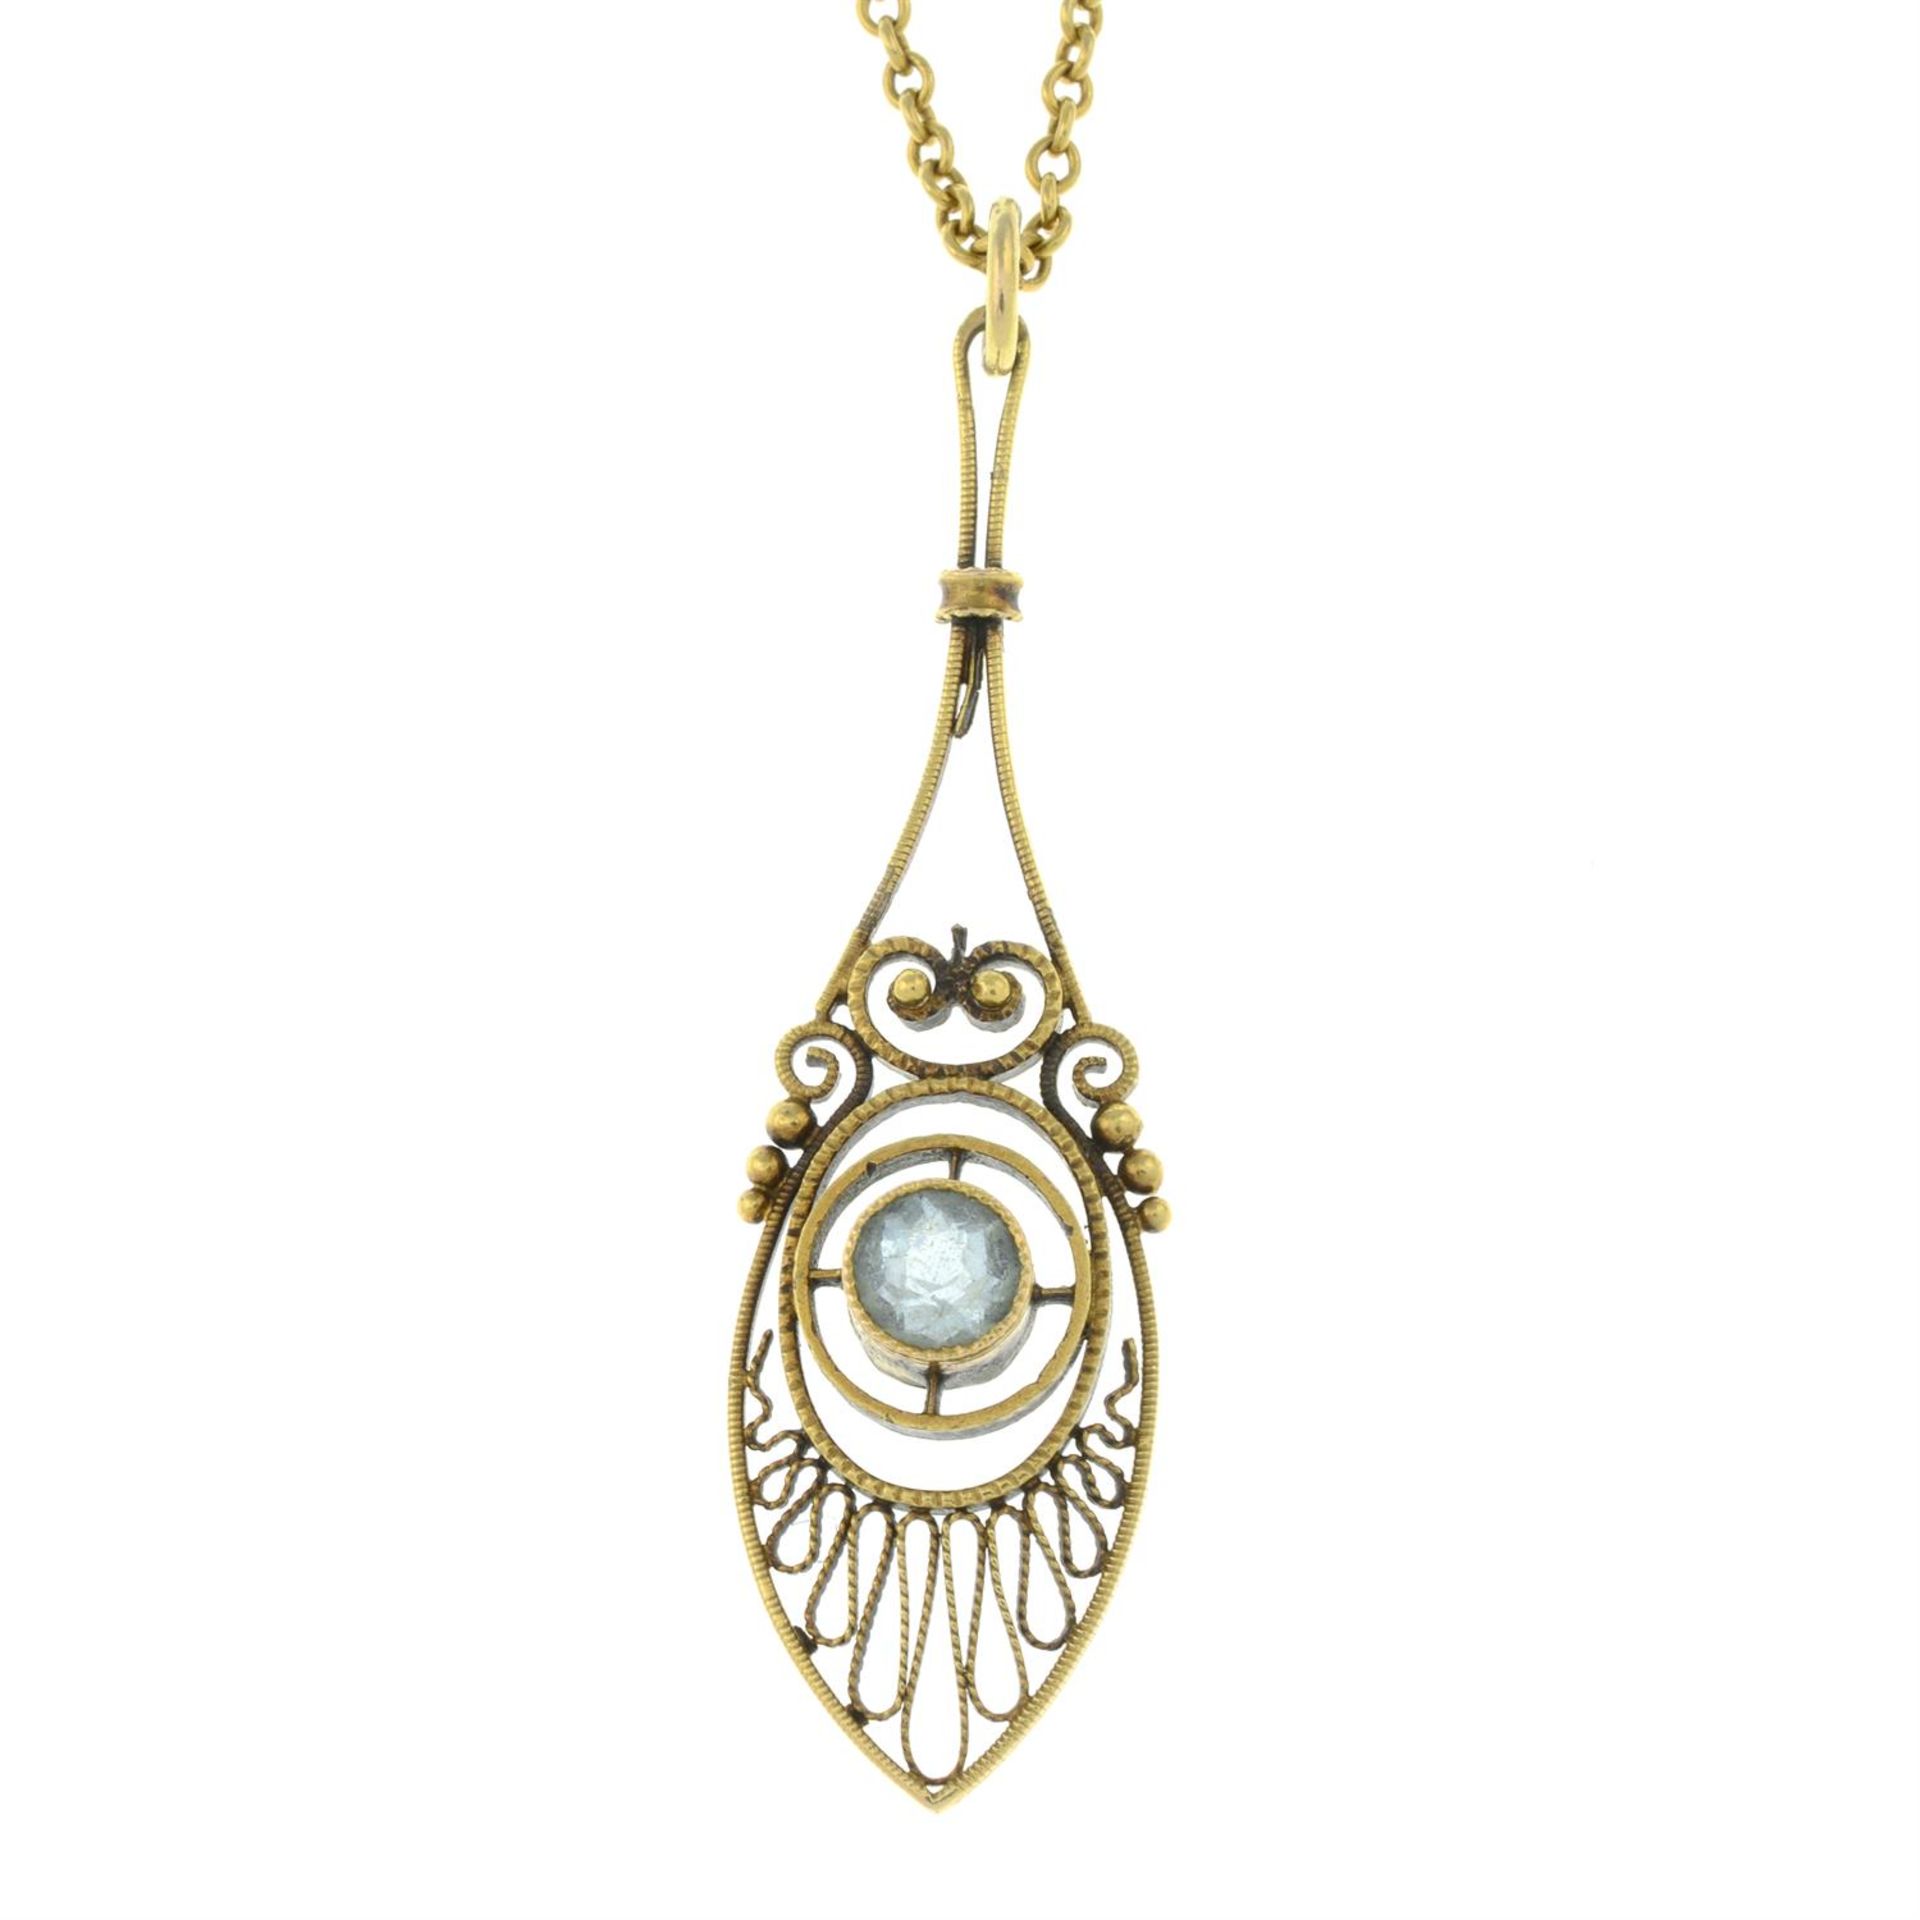 A 19th century gold aquamarine cannetille pendant, with chain.